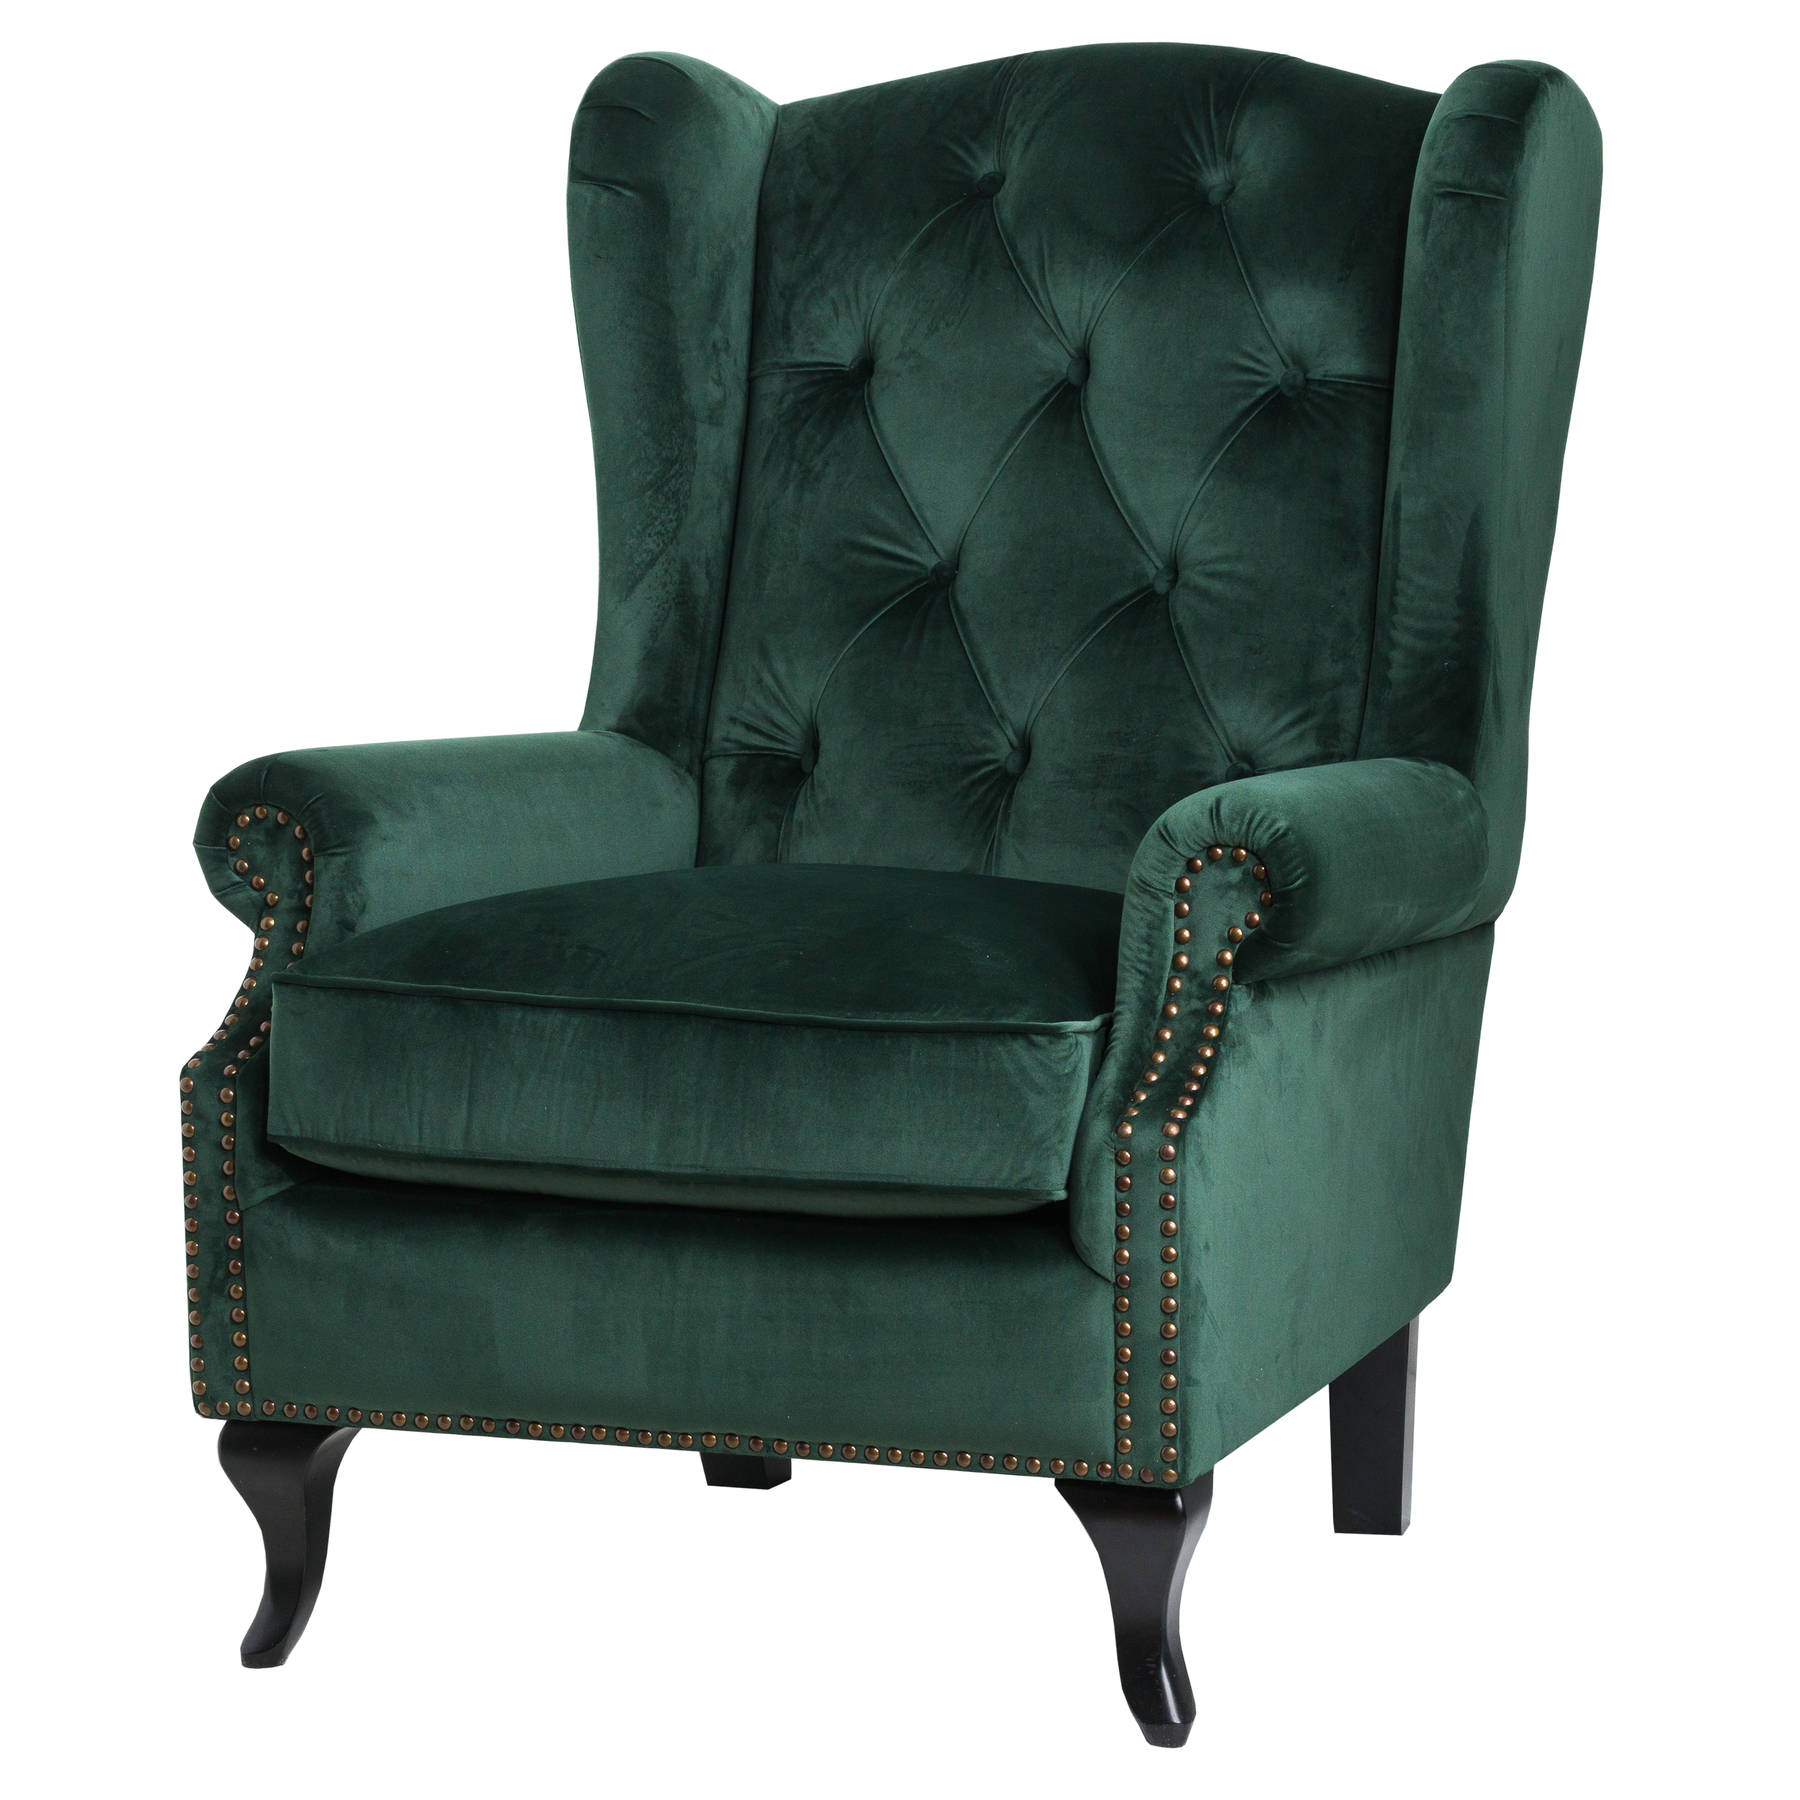 Emerald Green Button Pressed Wing Chair From Hill Interiors